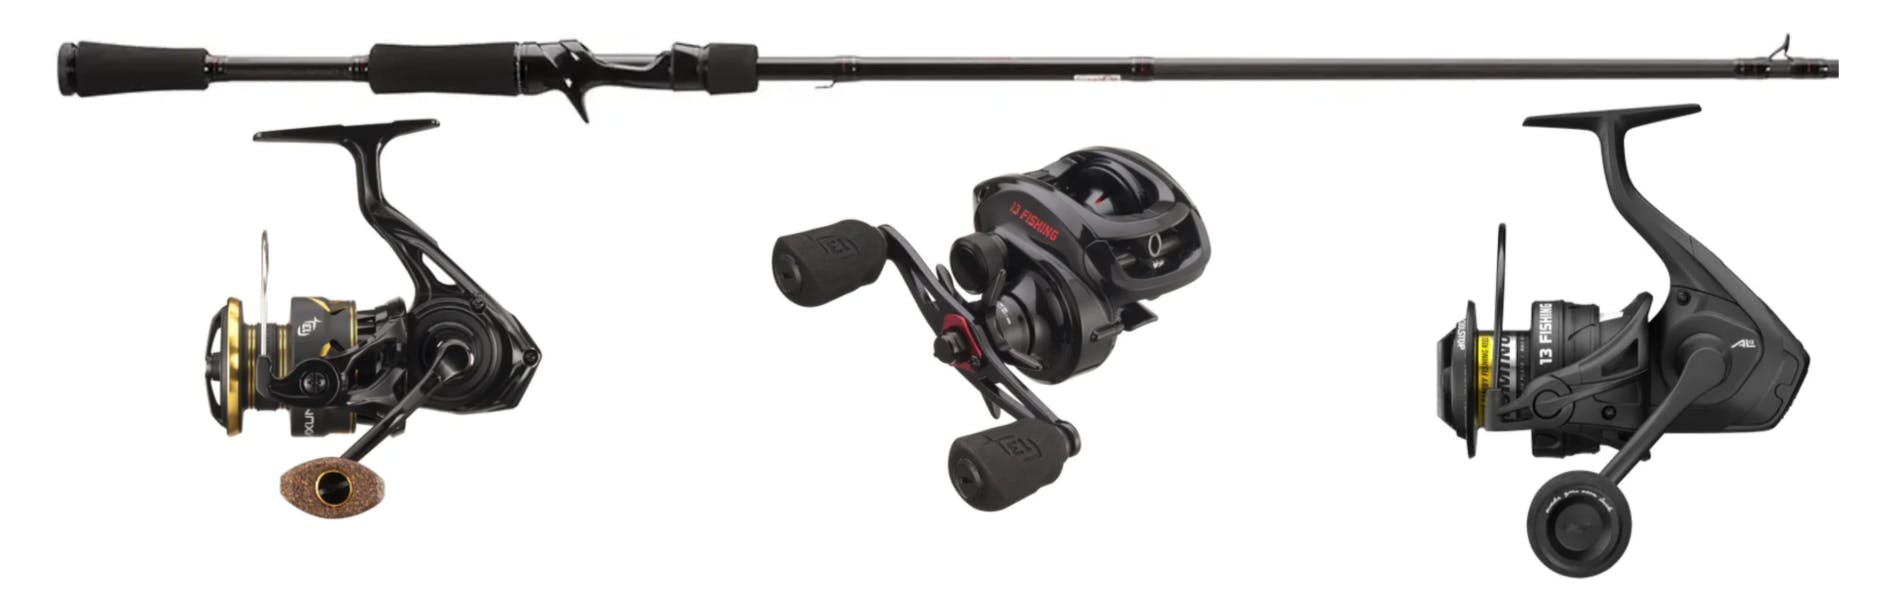 The Most Exciting New Gear from Pure Fishing for 2022